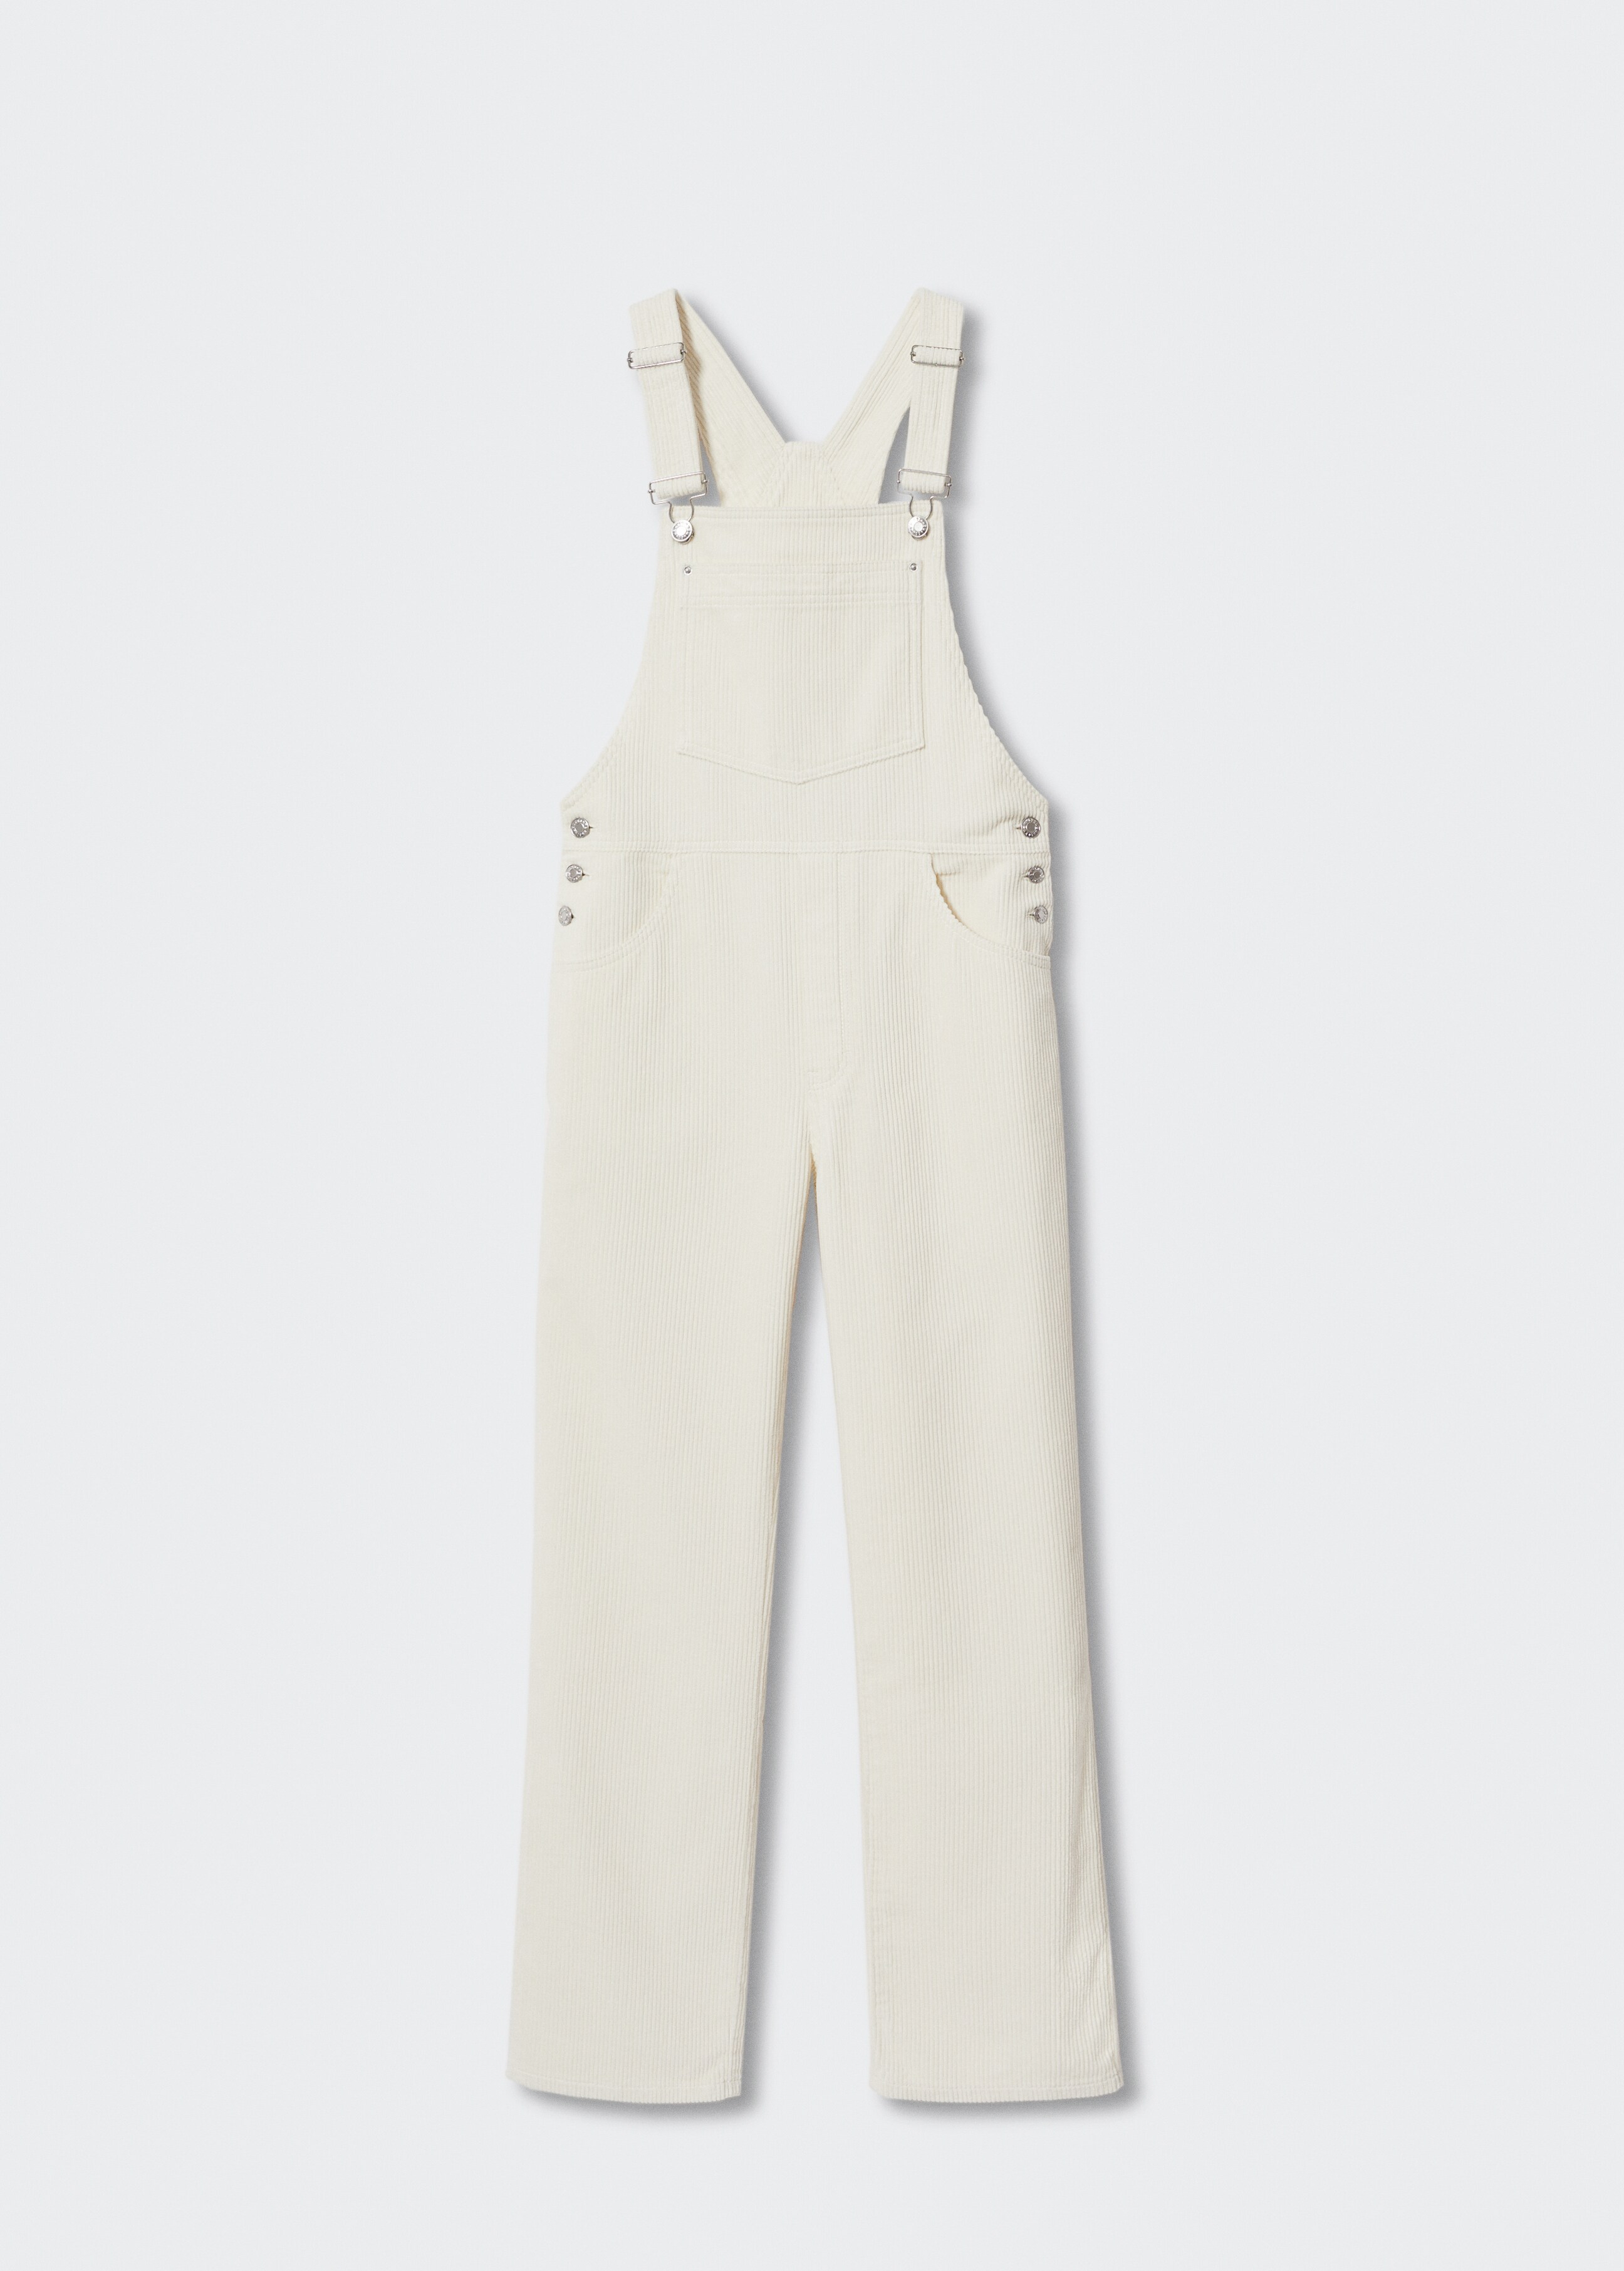 Corduroy dungarees - Article without model